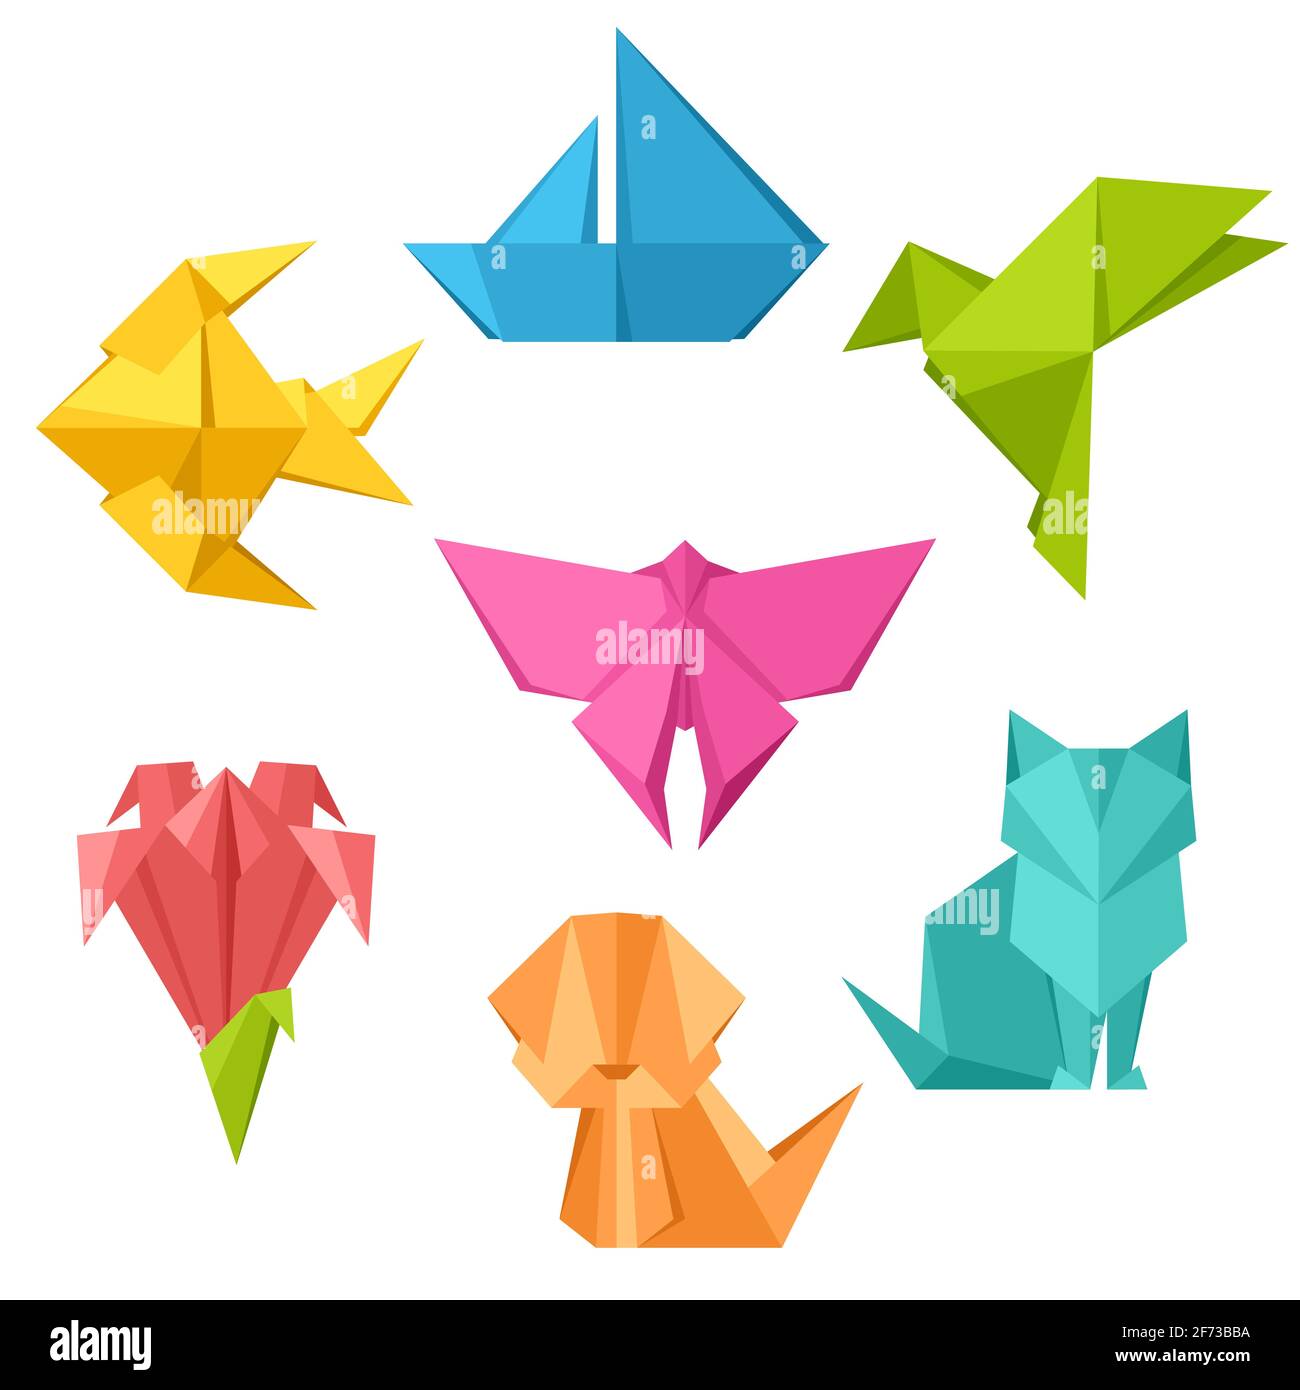 Set of origami toys. Folded paper objects. Stock Vector